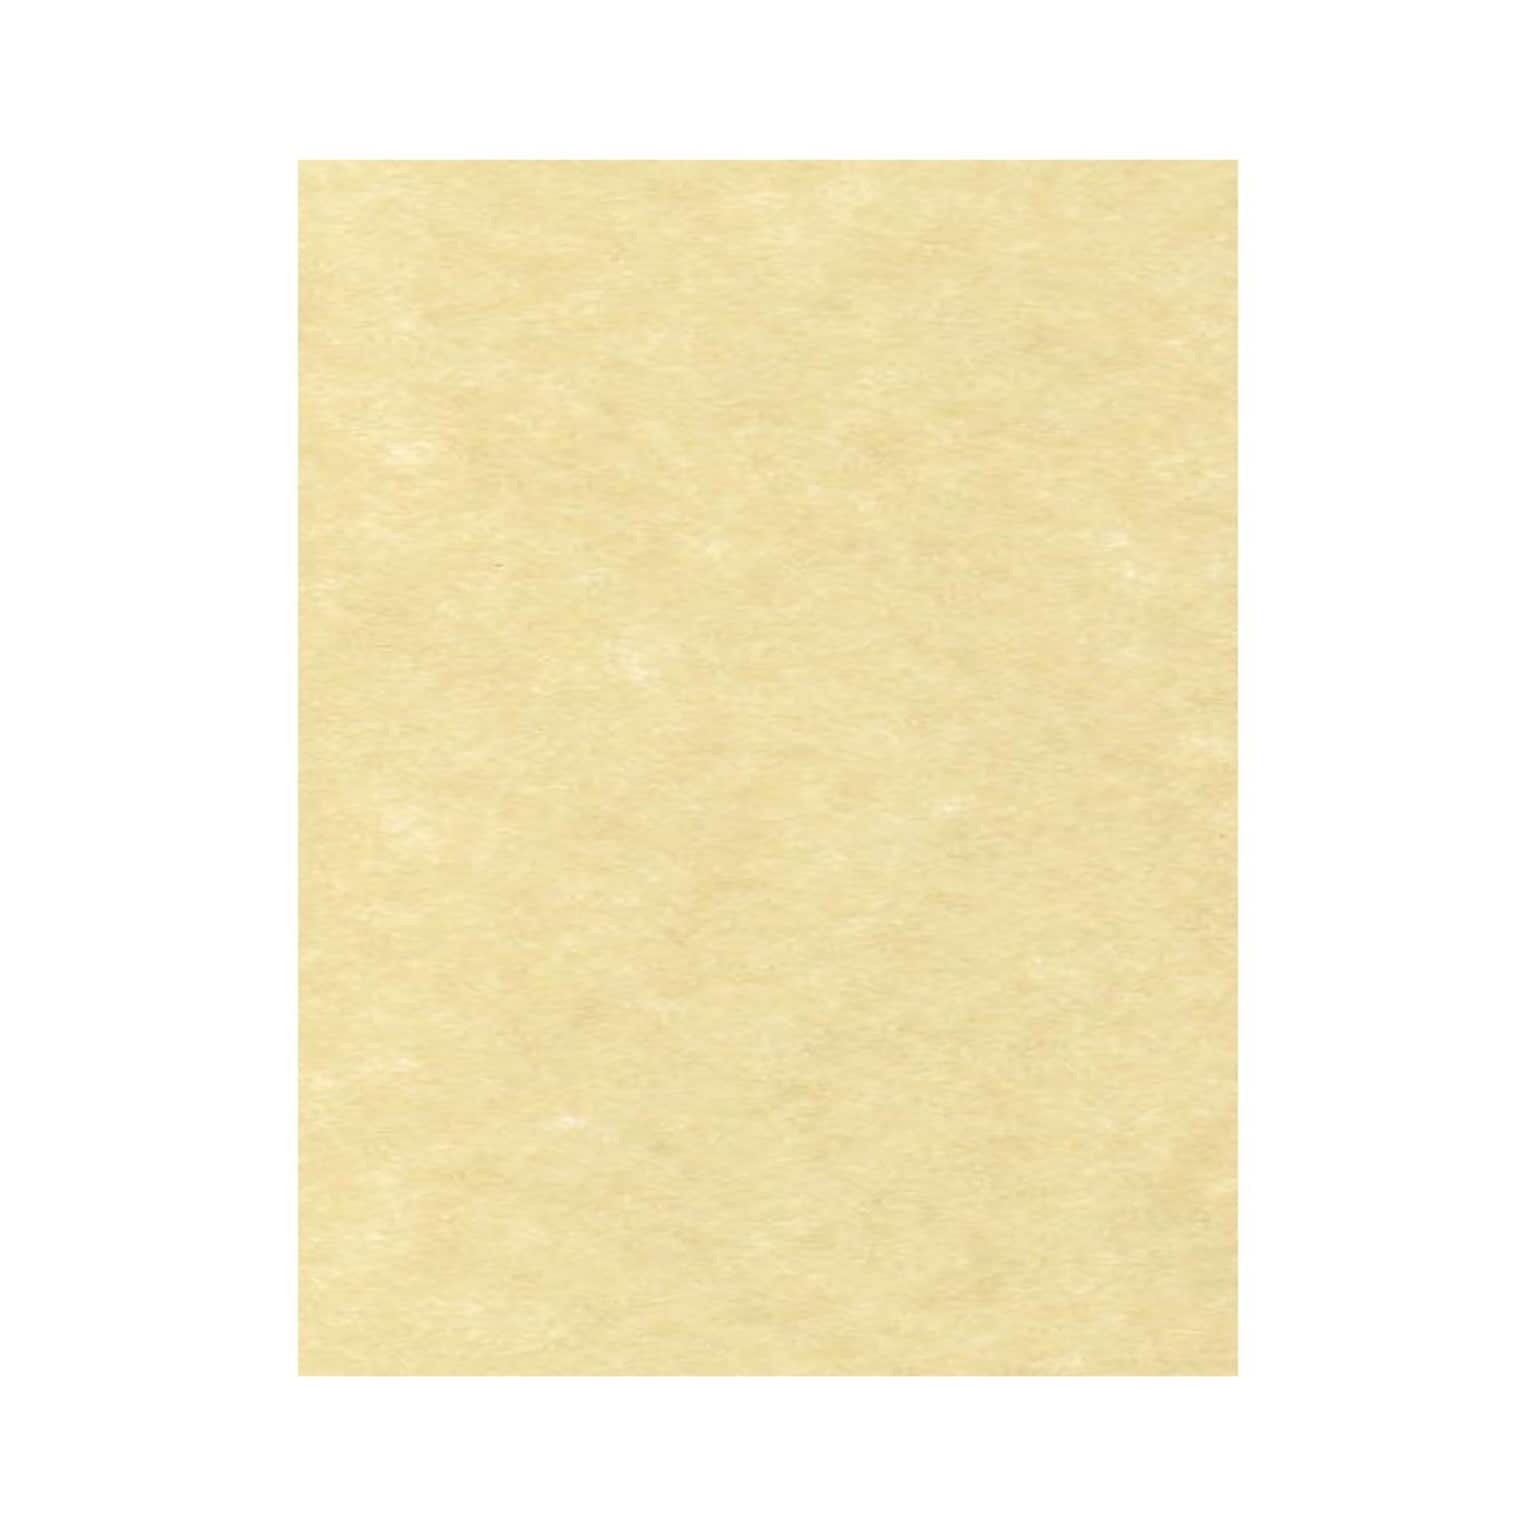 LUX Colored Paper,  28 lbs., 8.5 x 11, Gold Parchment, 500 Sheets/Pack (81211-P-41-500)